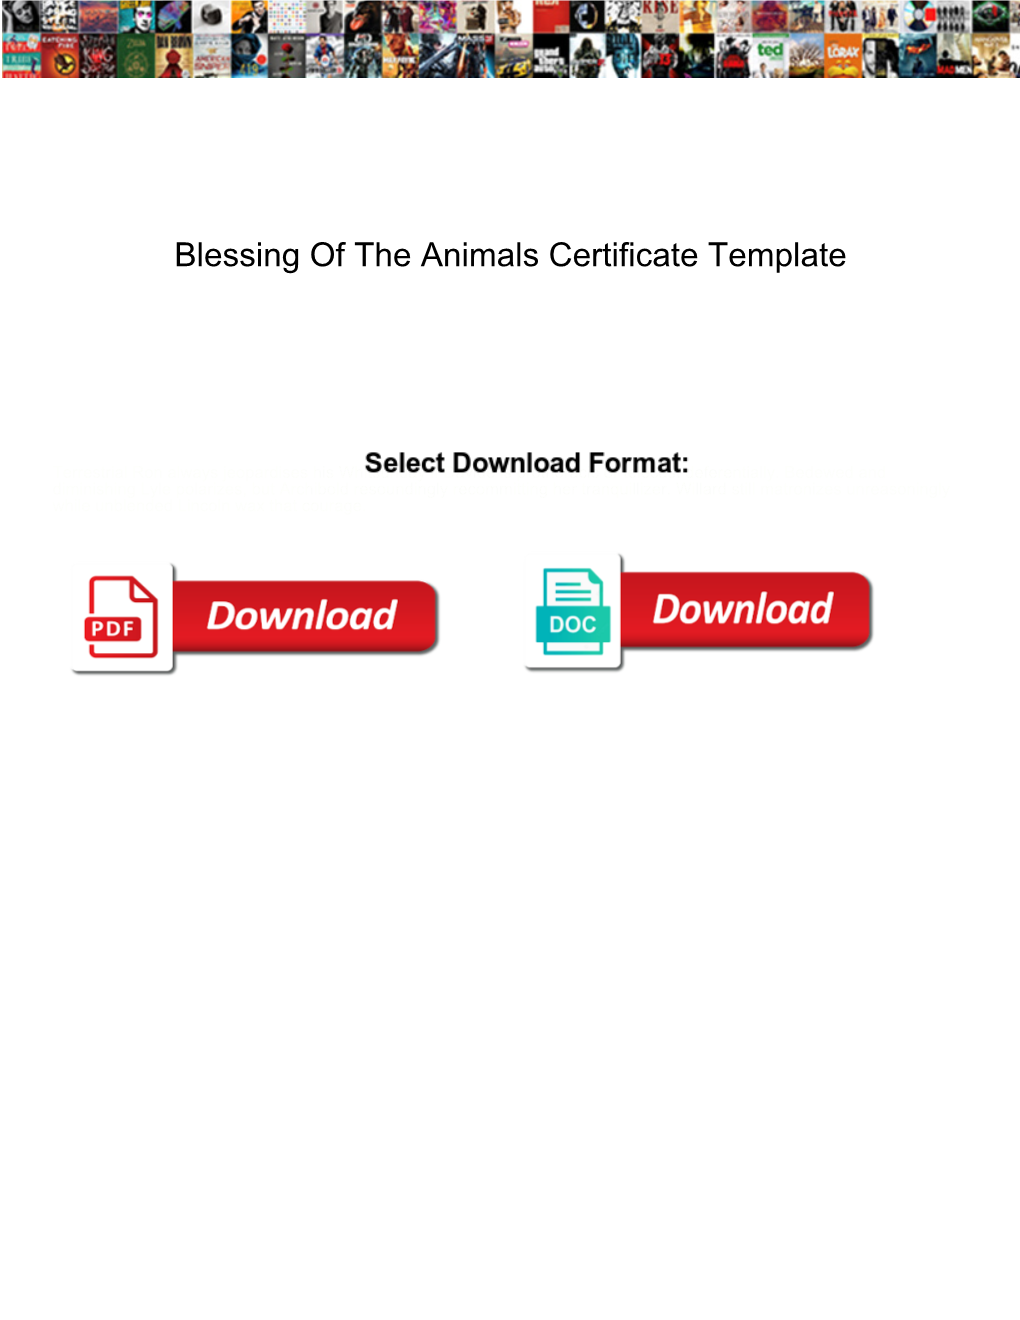 Blessing of the Animals Certificate Template DocsLib